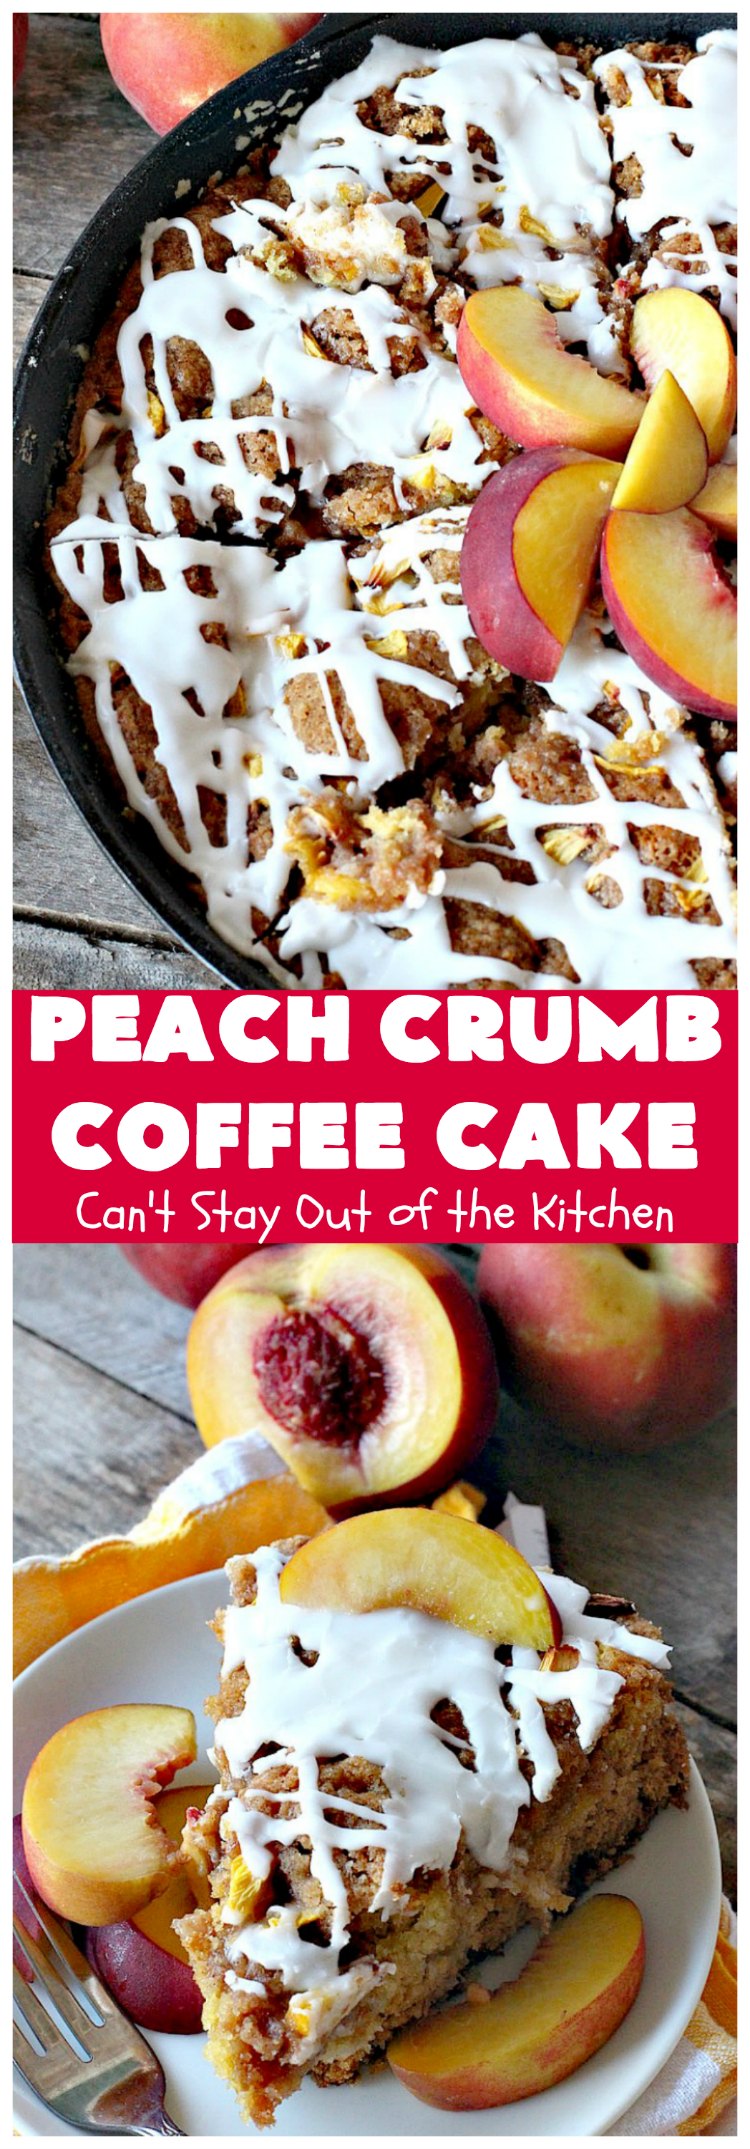 Peach Crumb Coffee Cake | Can't Stay Out of the Kitchen